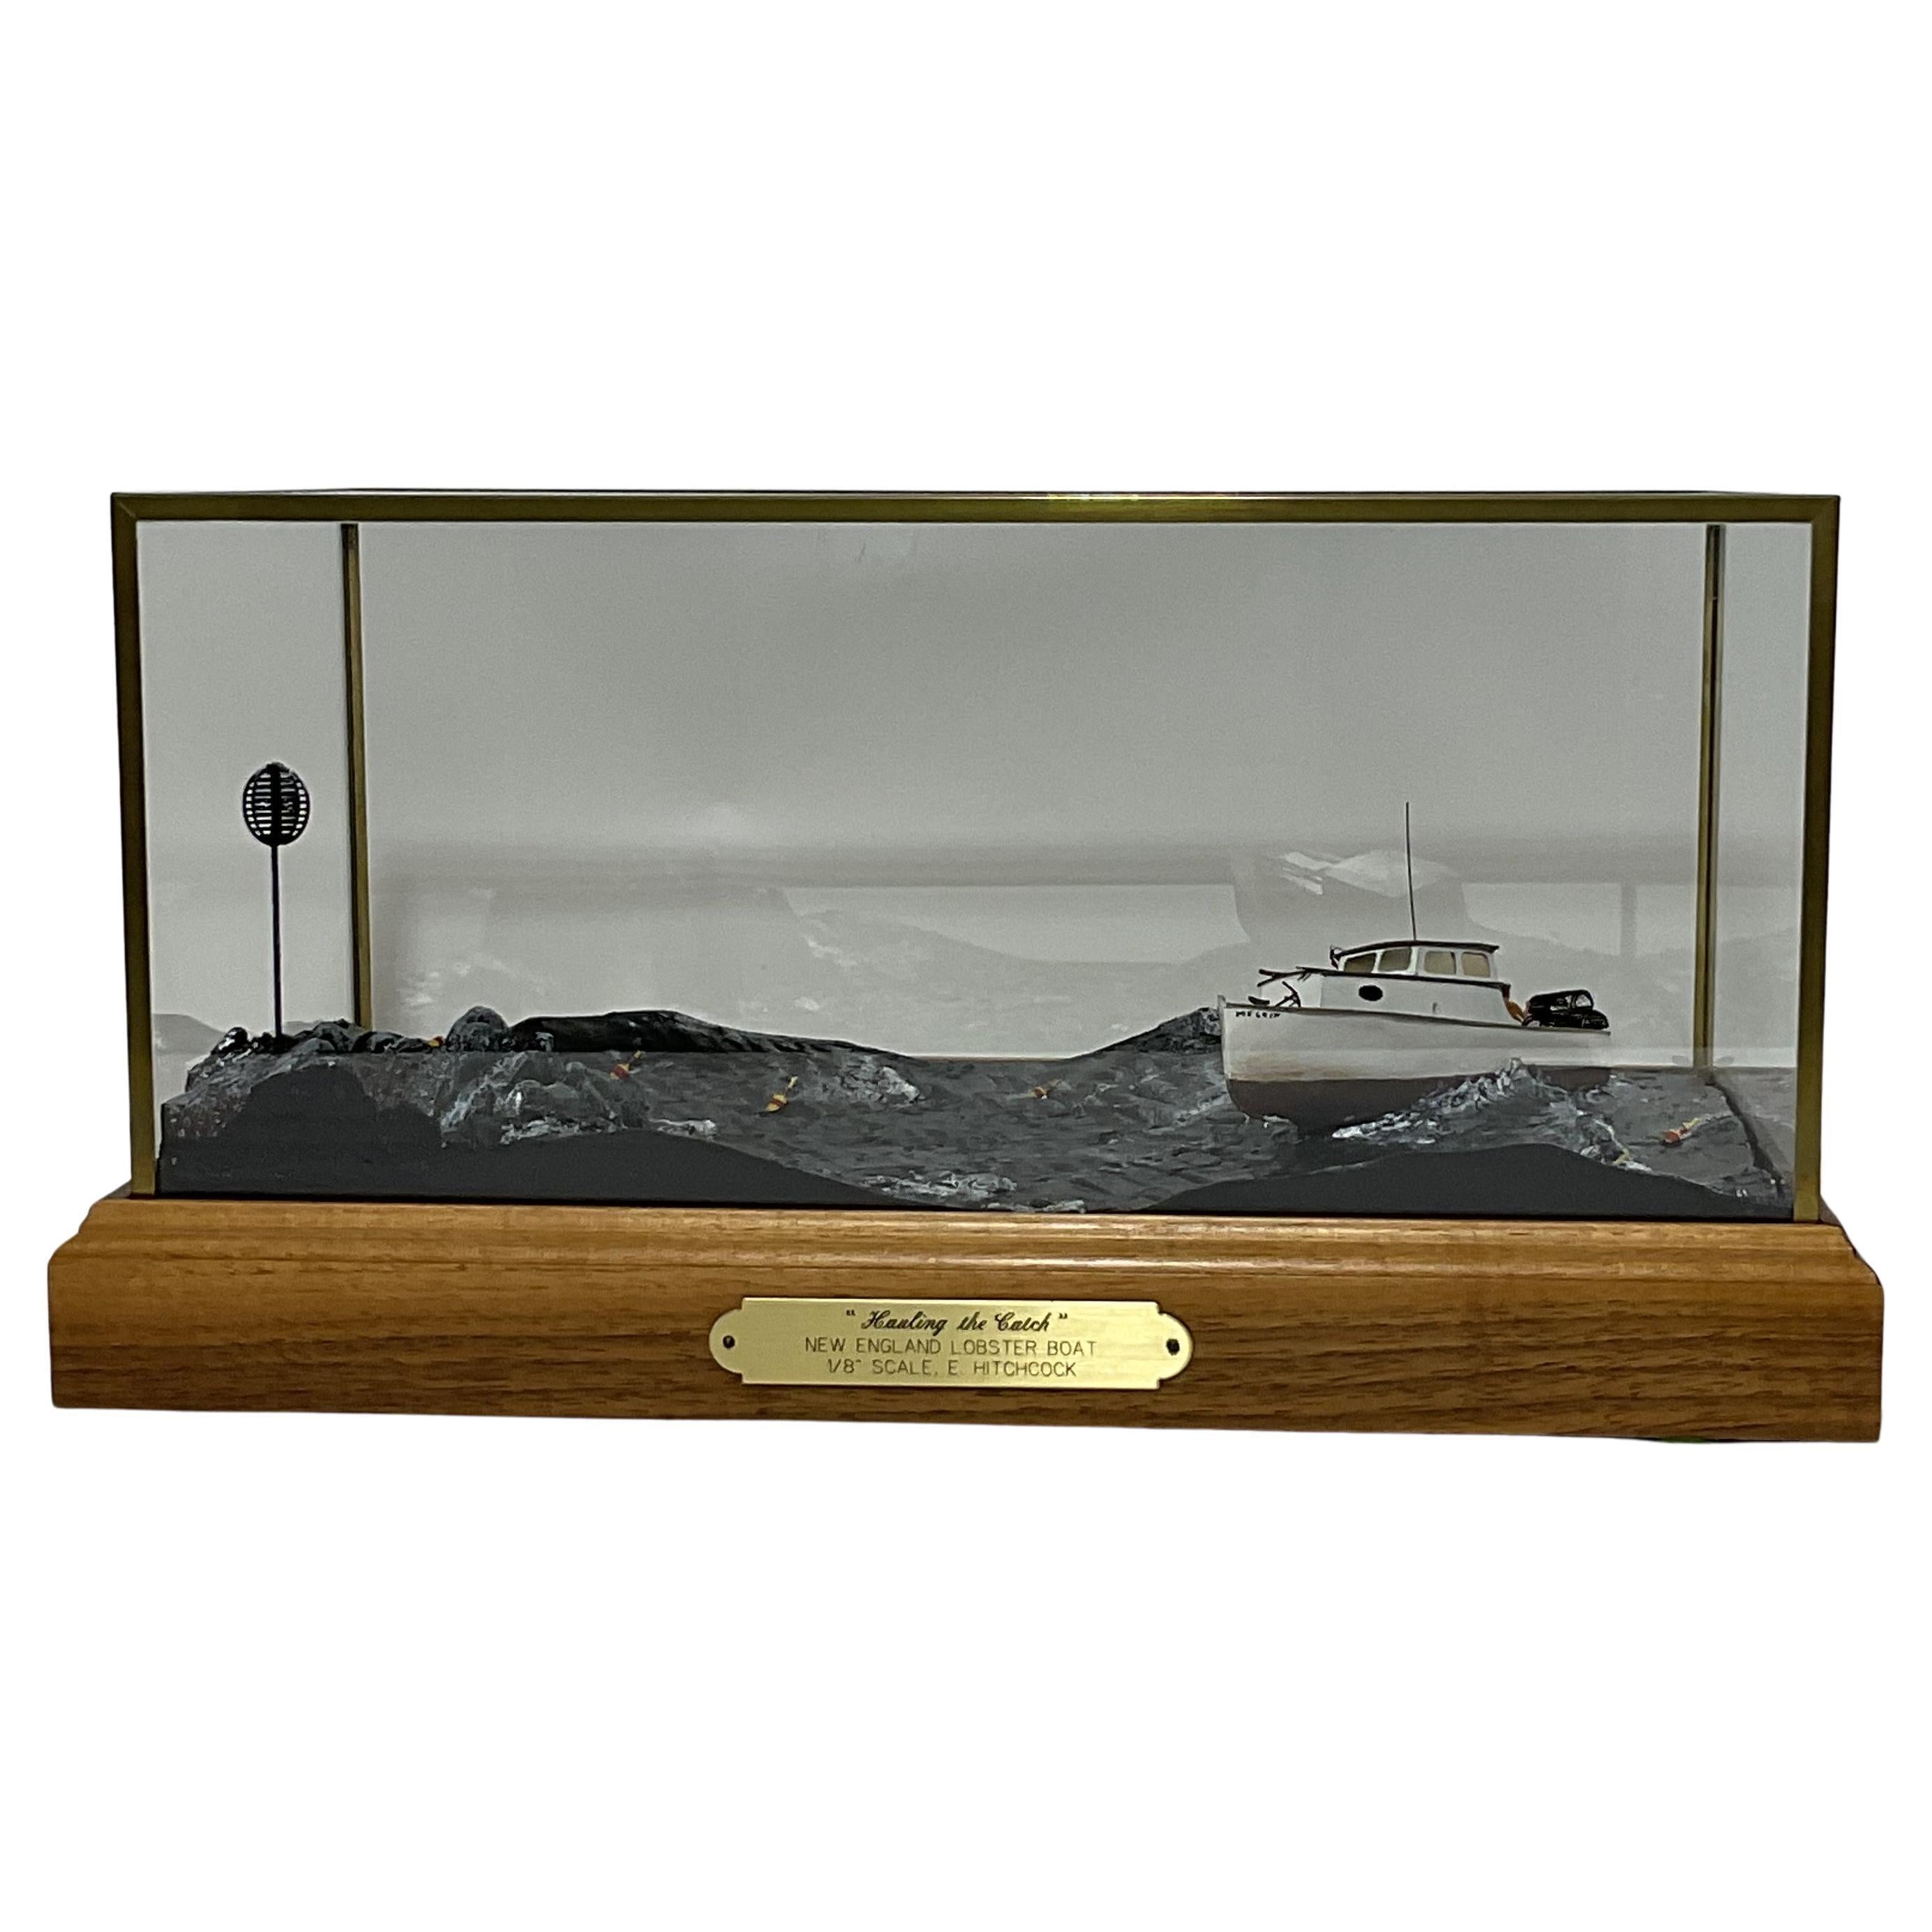 Lobster Boat Diorama Titled "Hauling the Catch" For Sale